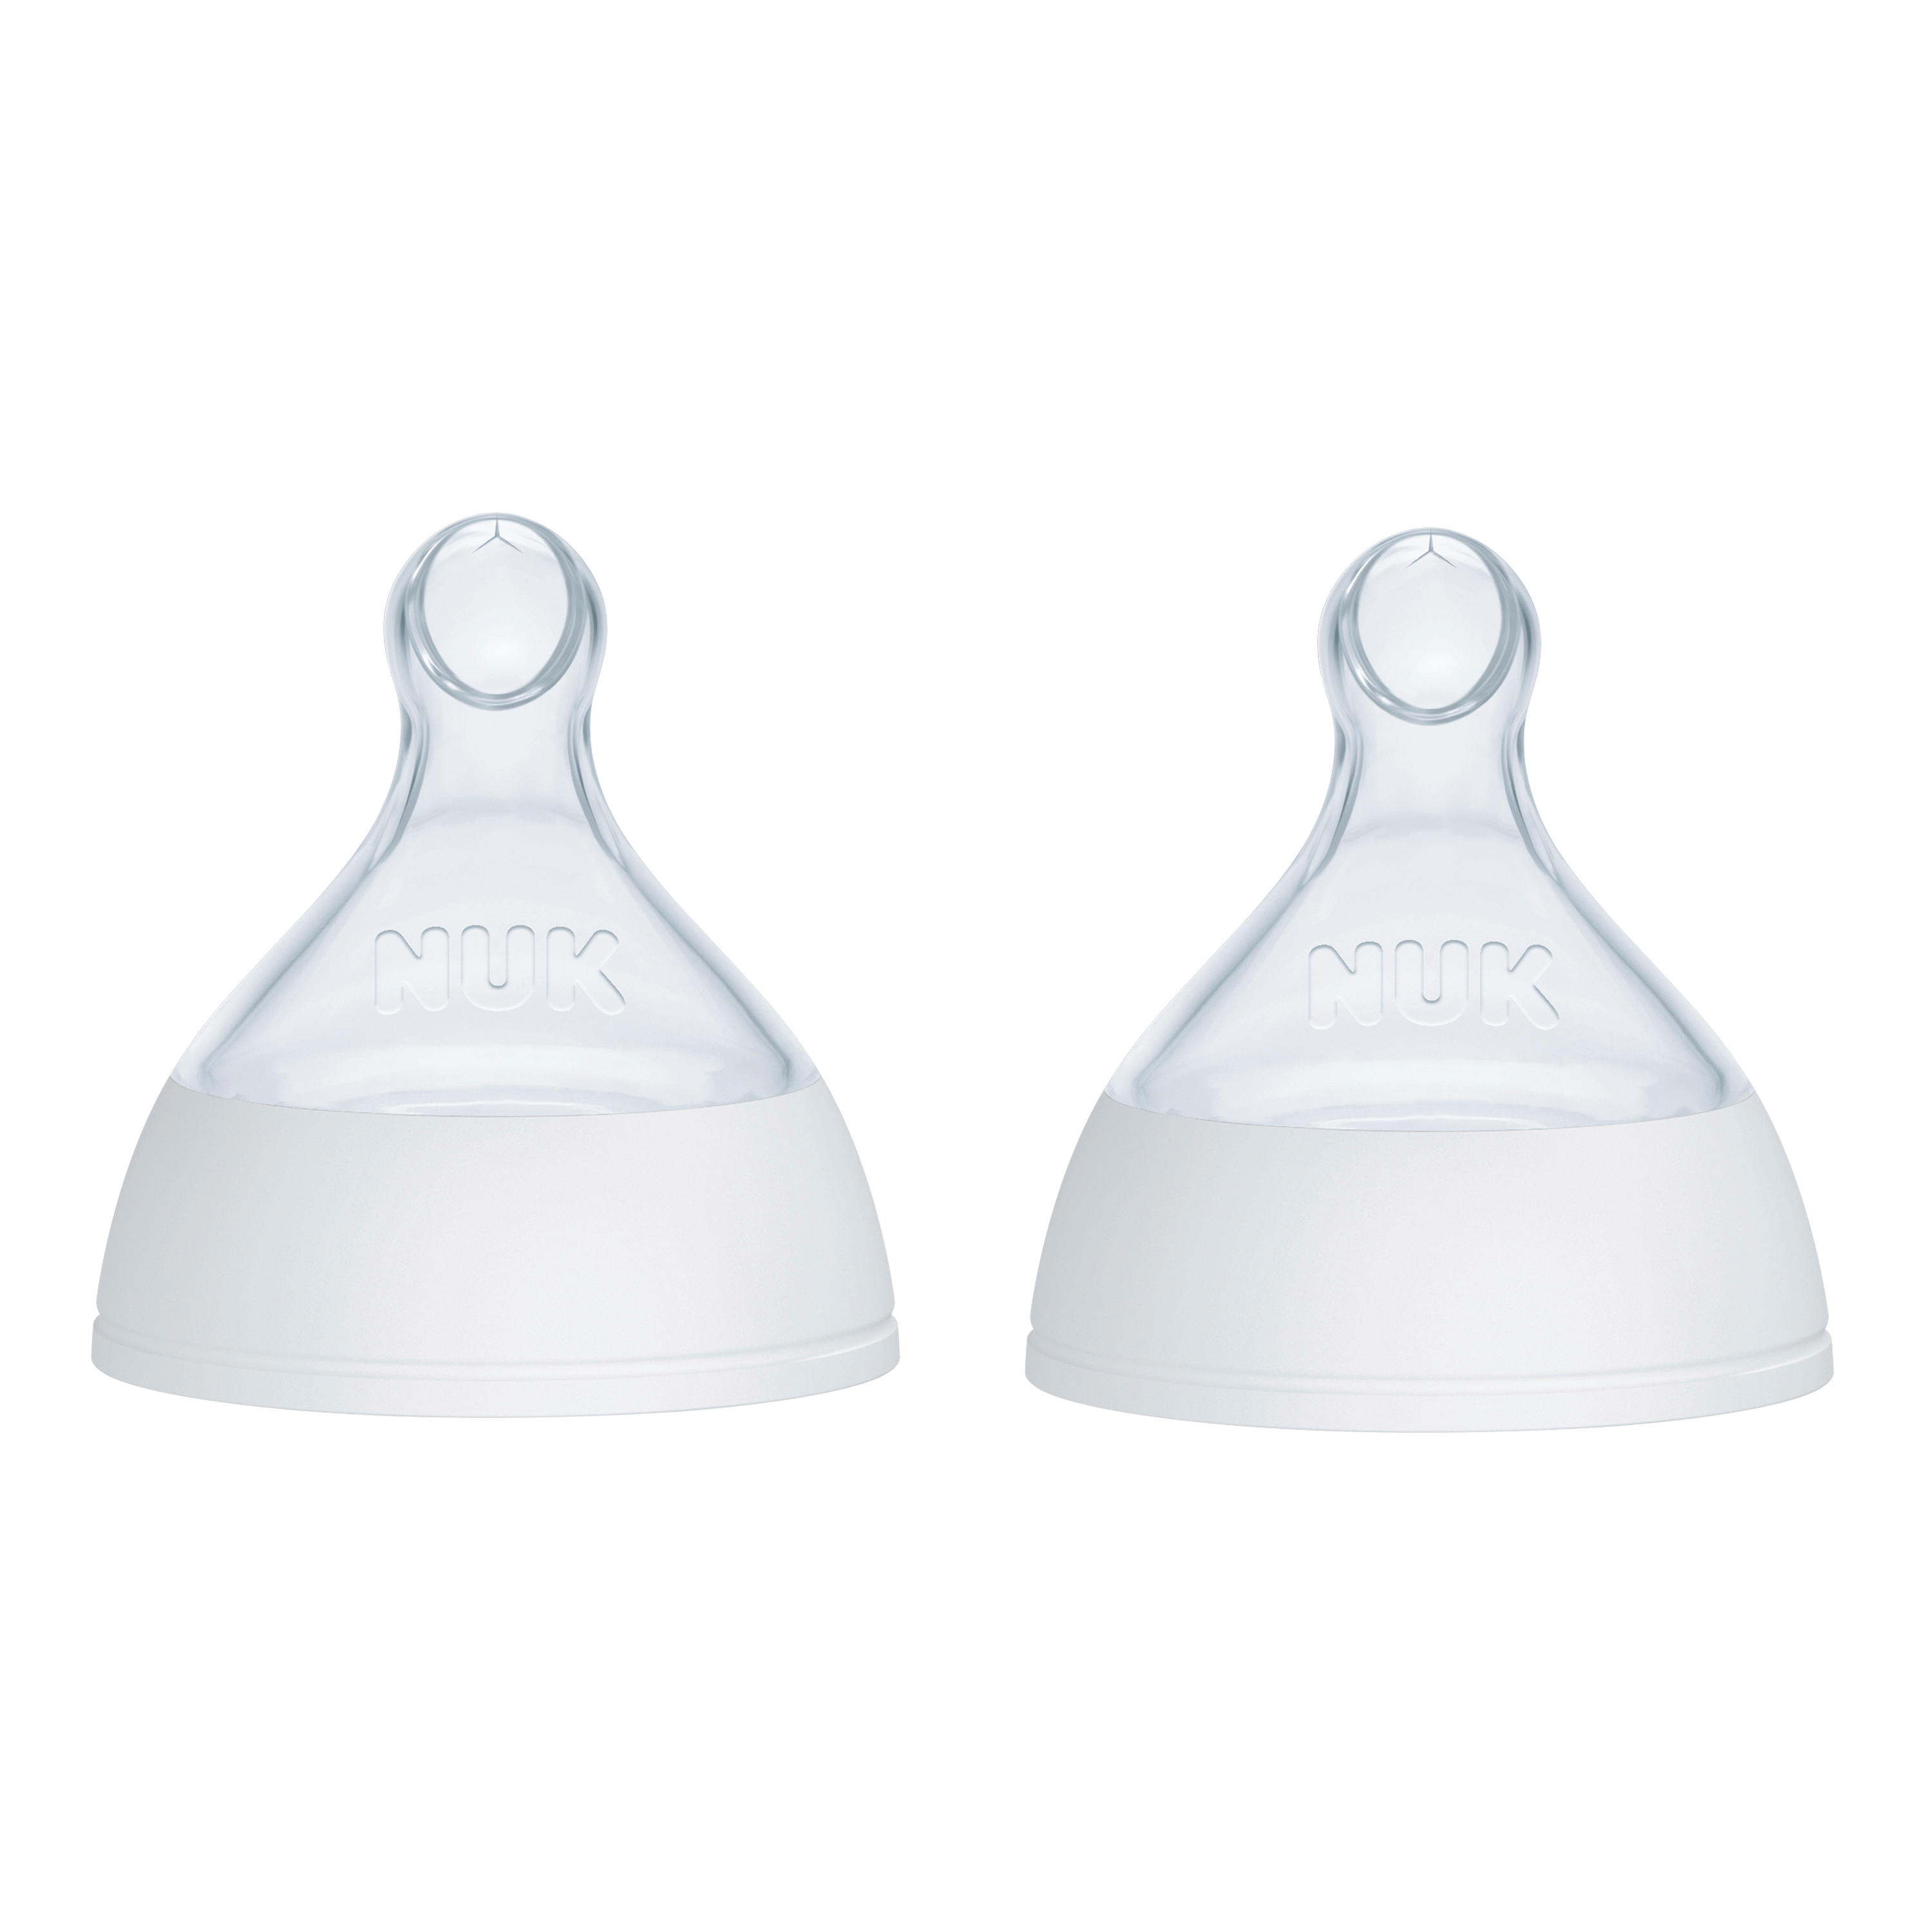 NUK Smooth Flow™ Pro Anti-Colic Baby Bottle Replacement Nipples, 2-Pack - image 1 of 11